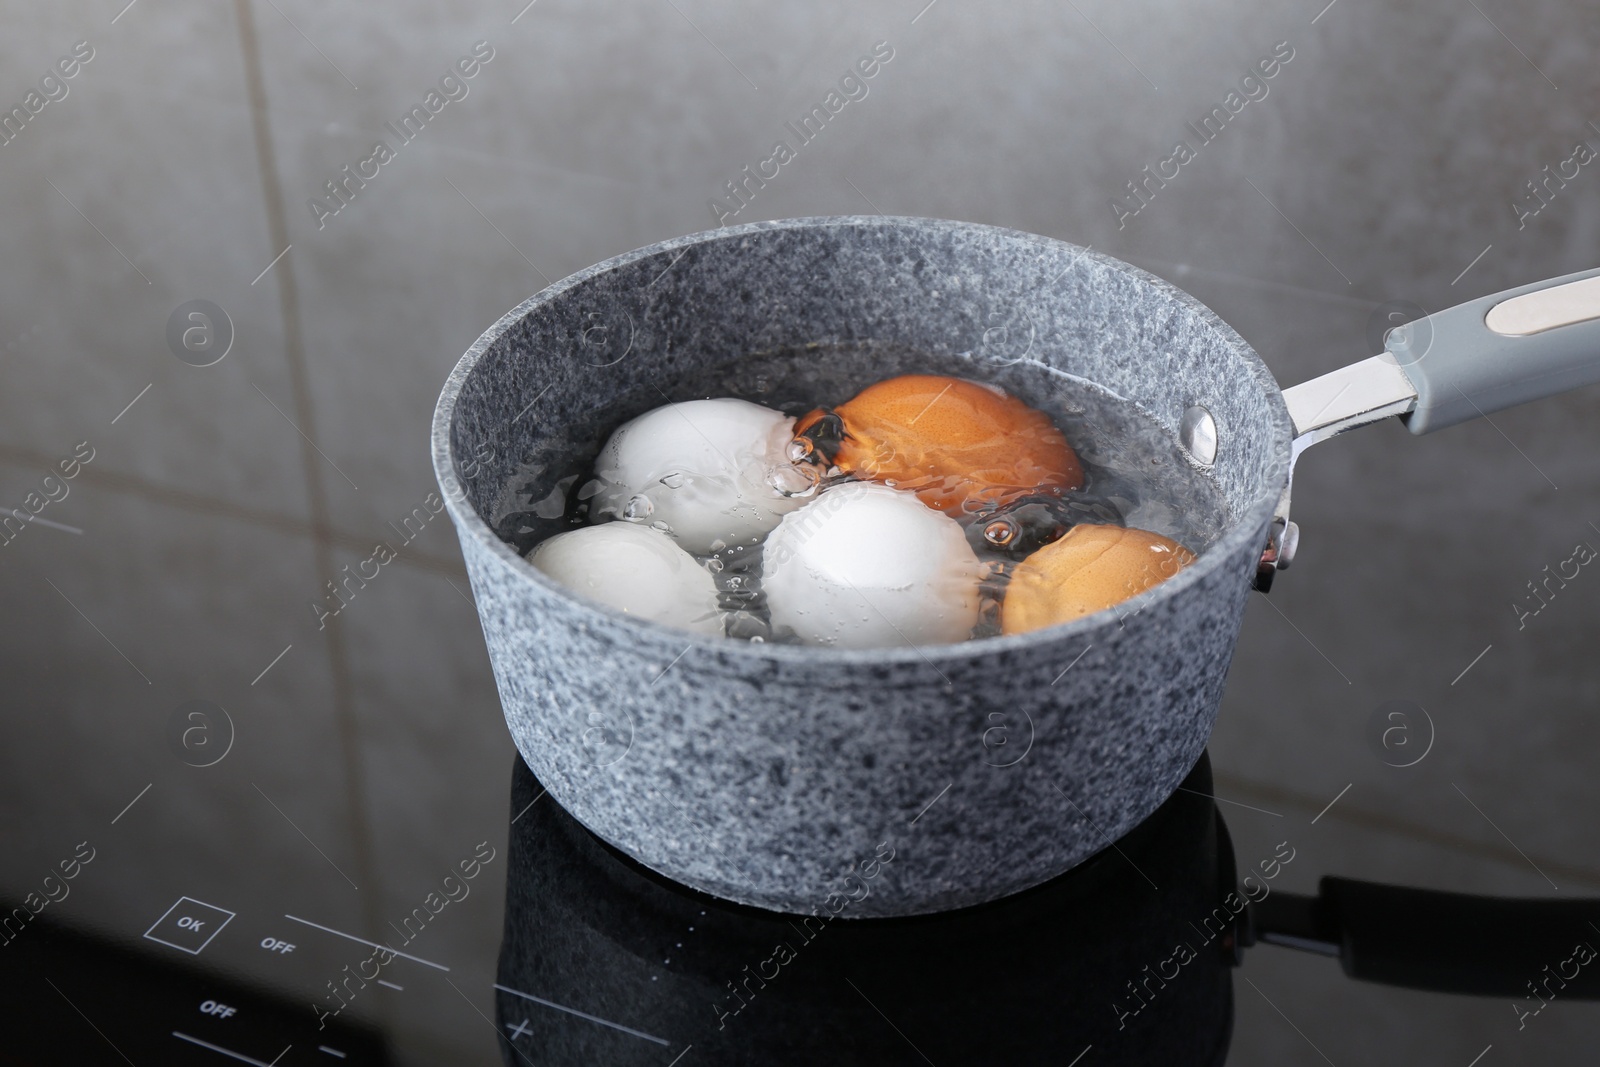 Photo of Chicken eggs boiling in saucepan on electric stove